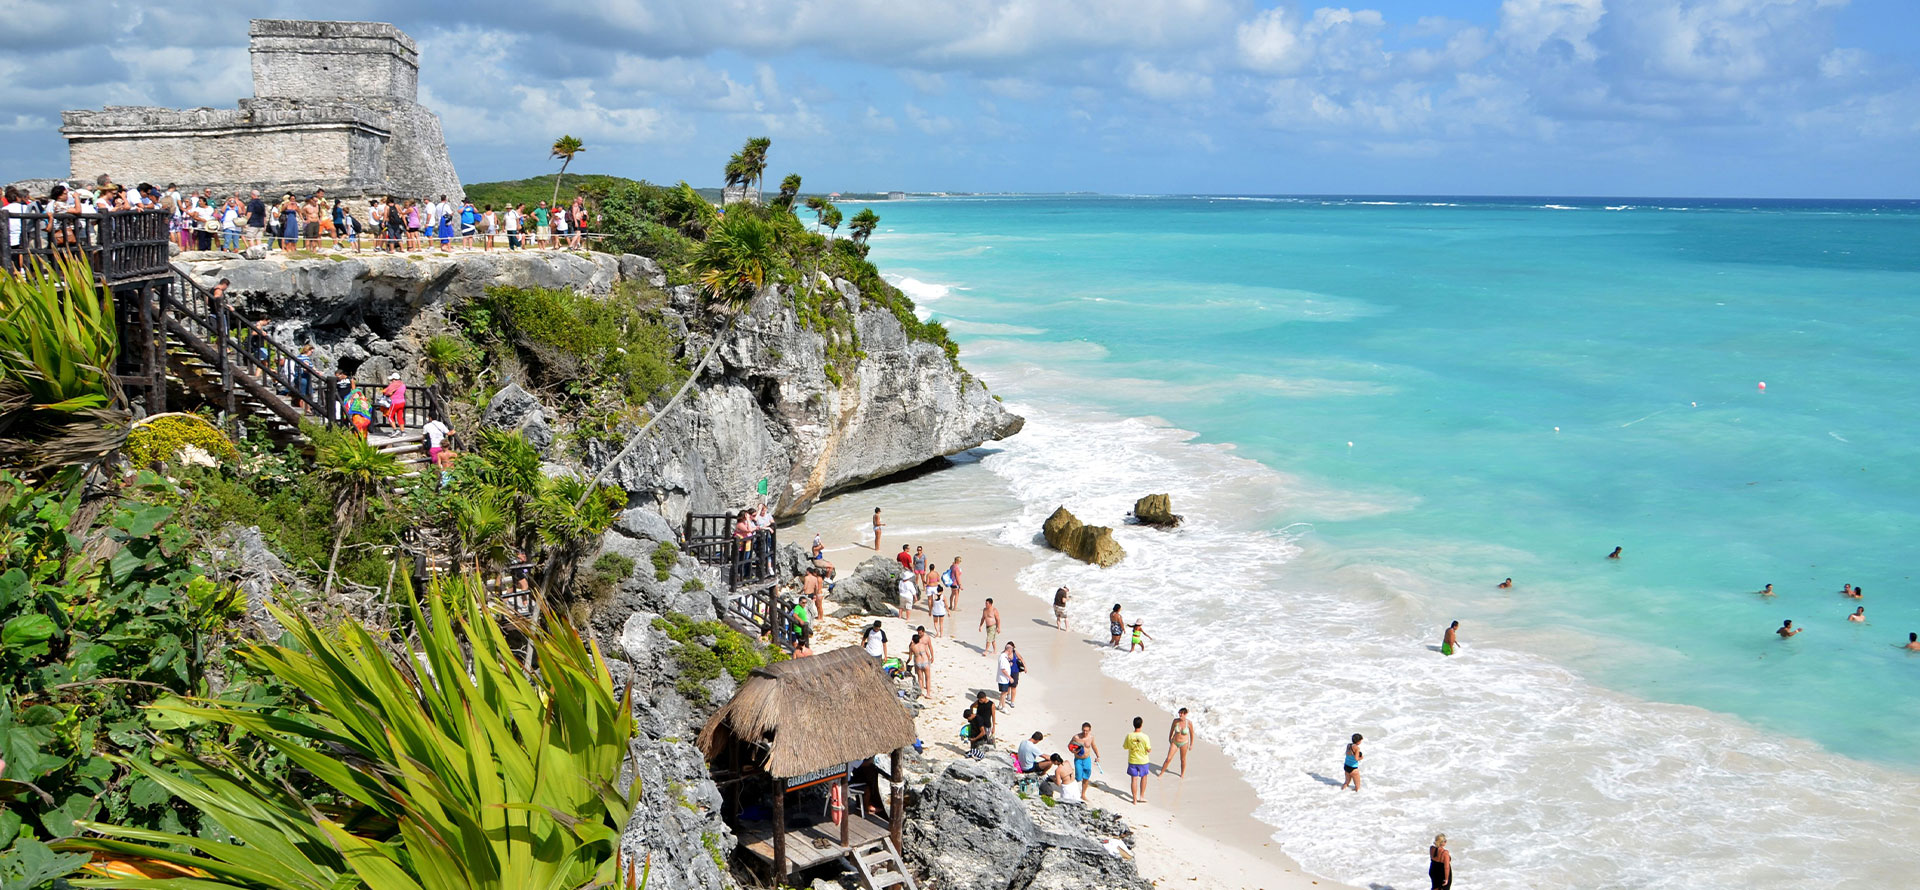 Tulum rocks and beach at best time to visit.